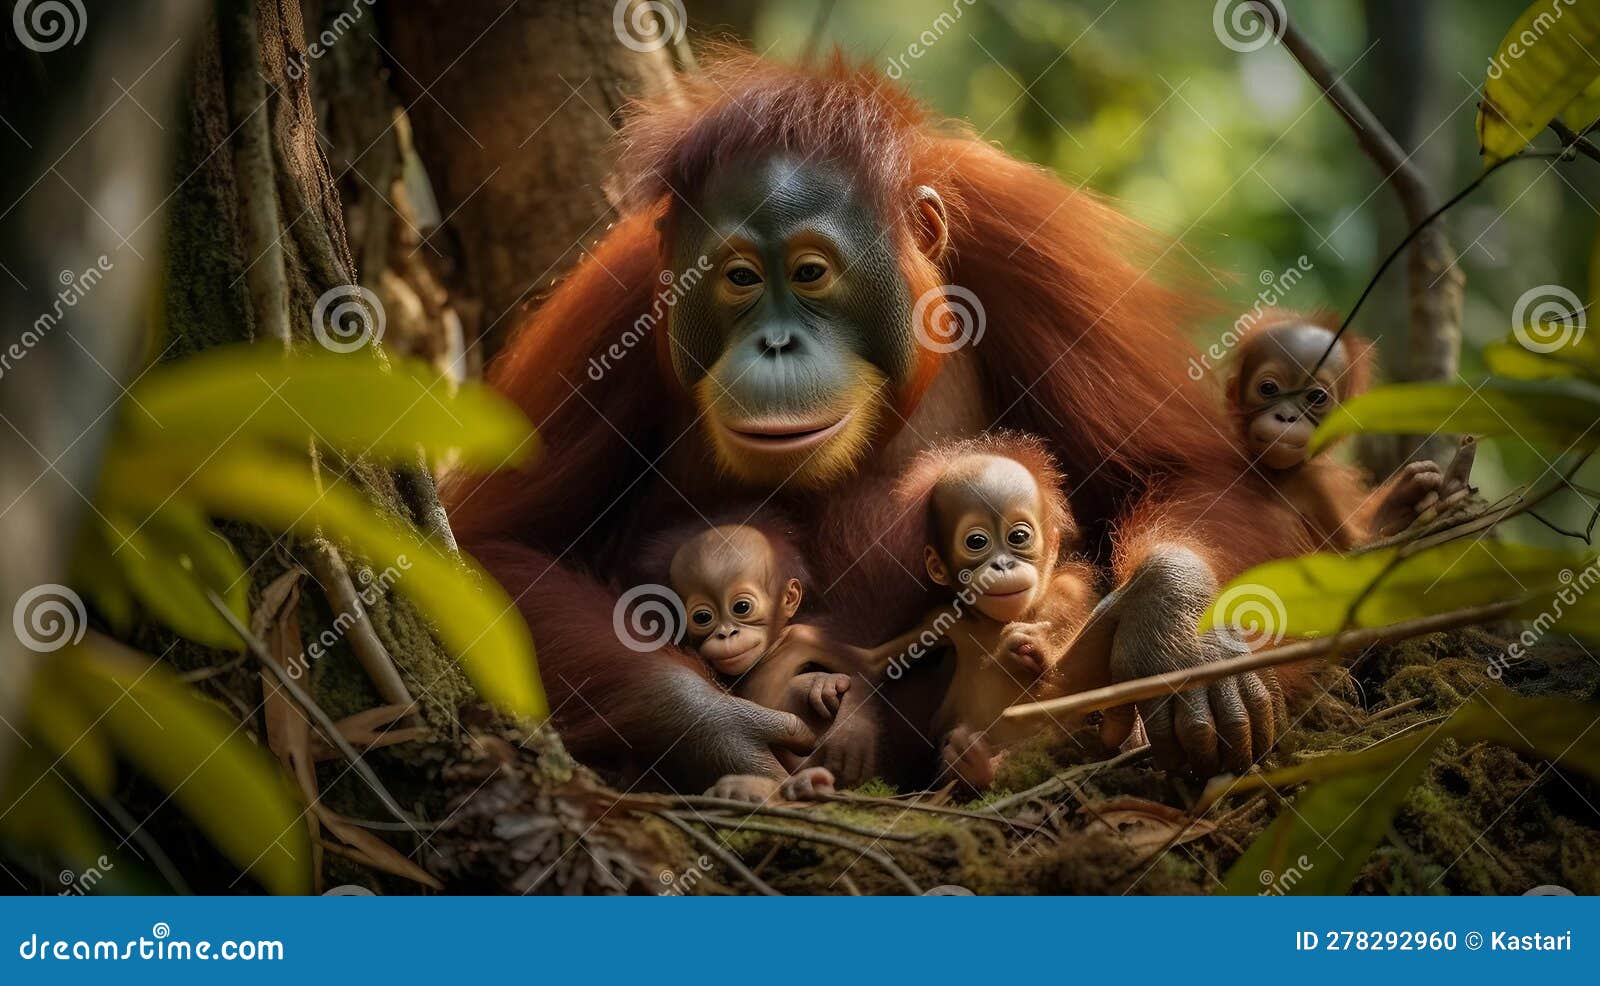 tapanuli orangutan is with his family and children in the forest